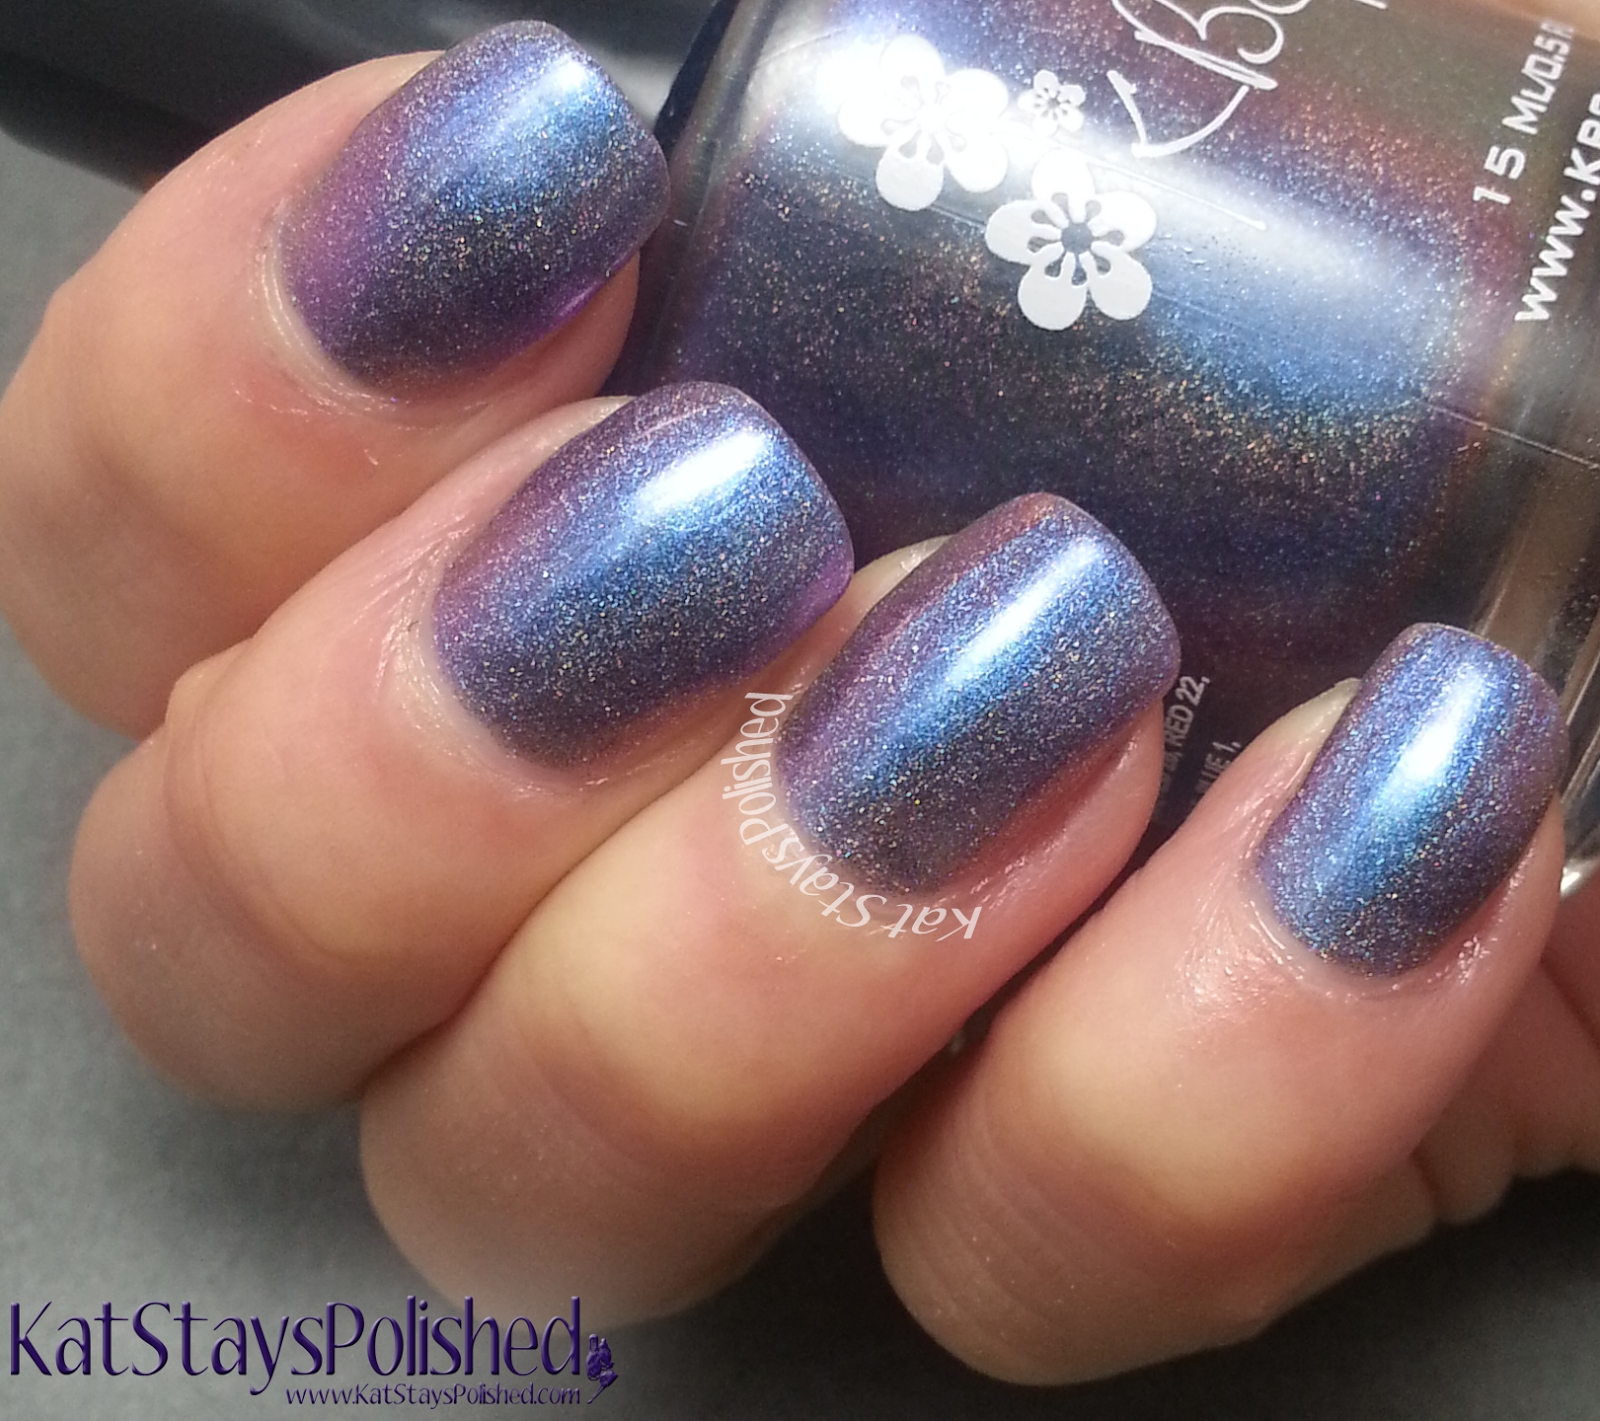 KBShimmer - Rollin' With the Chromies | Kat Stays Polished